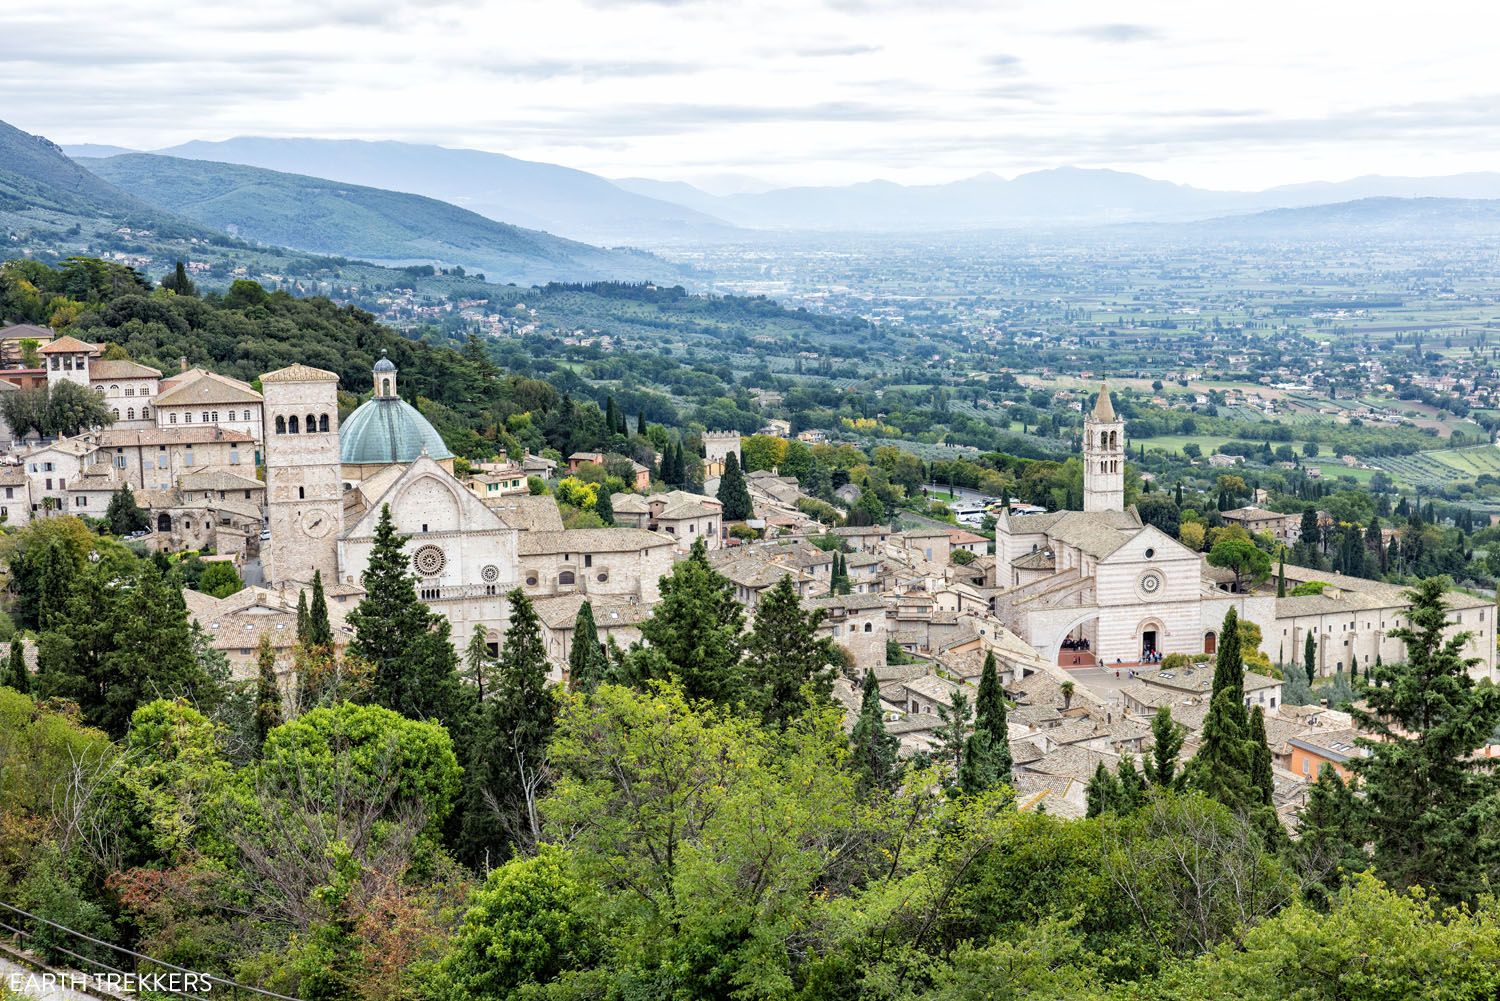 Things to Do in Assisi View